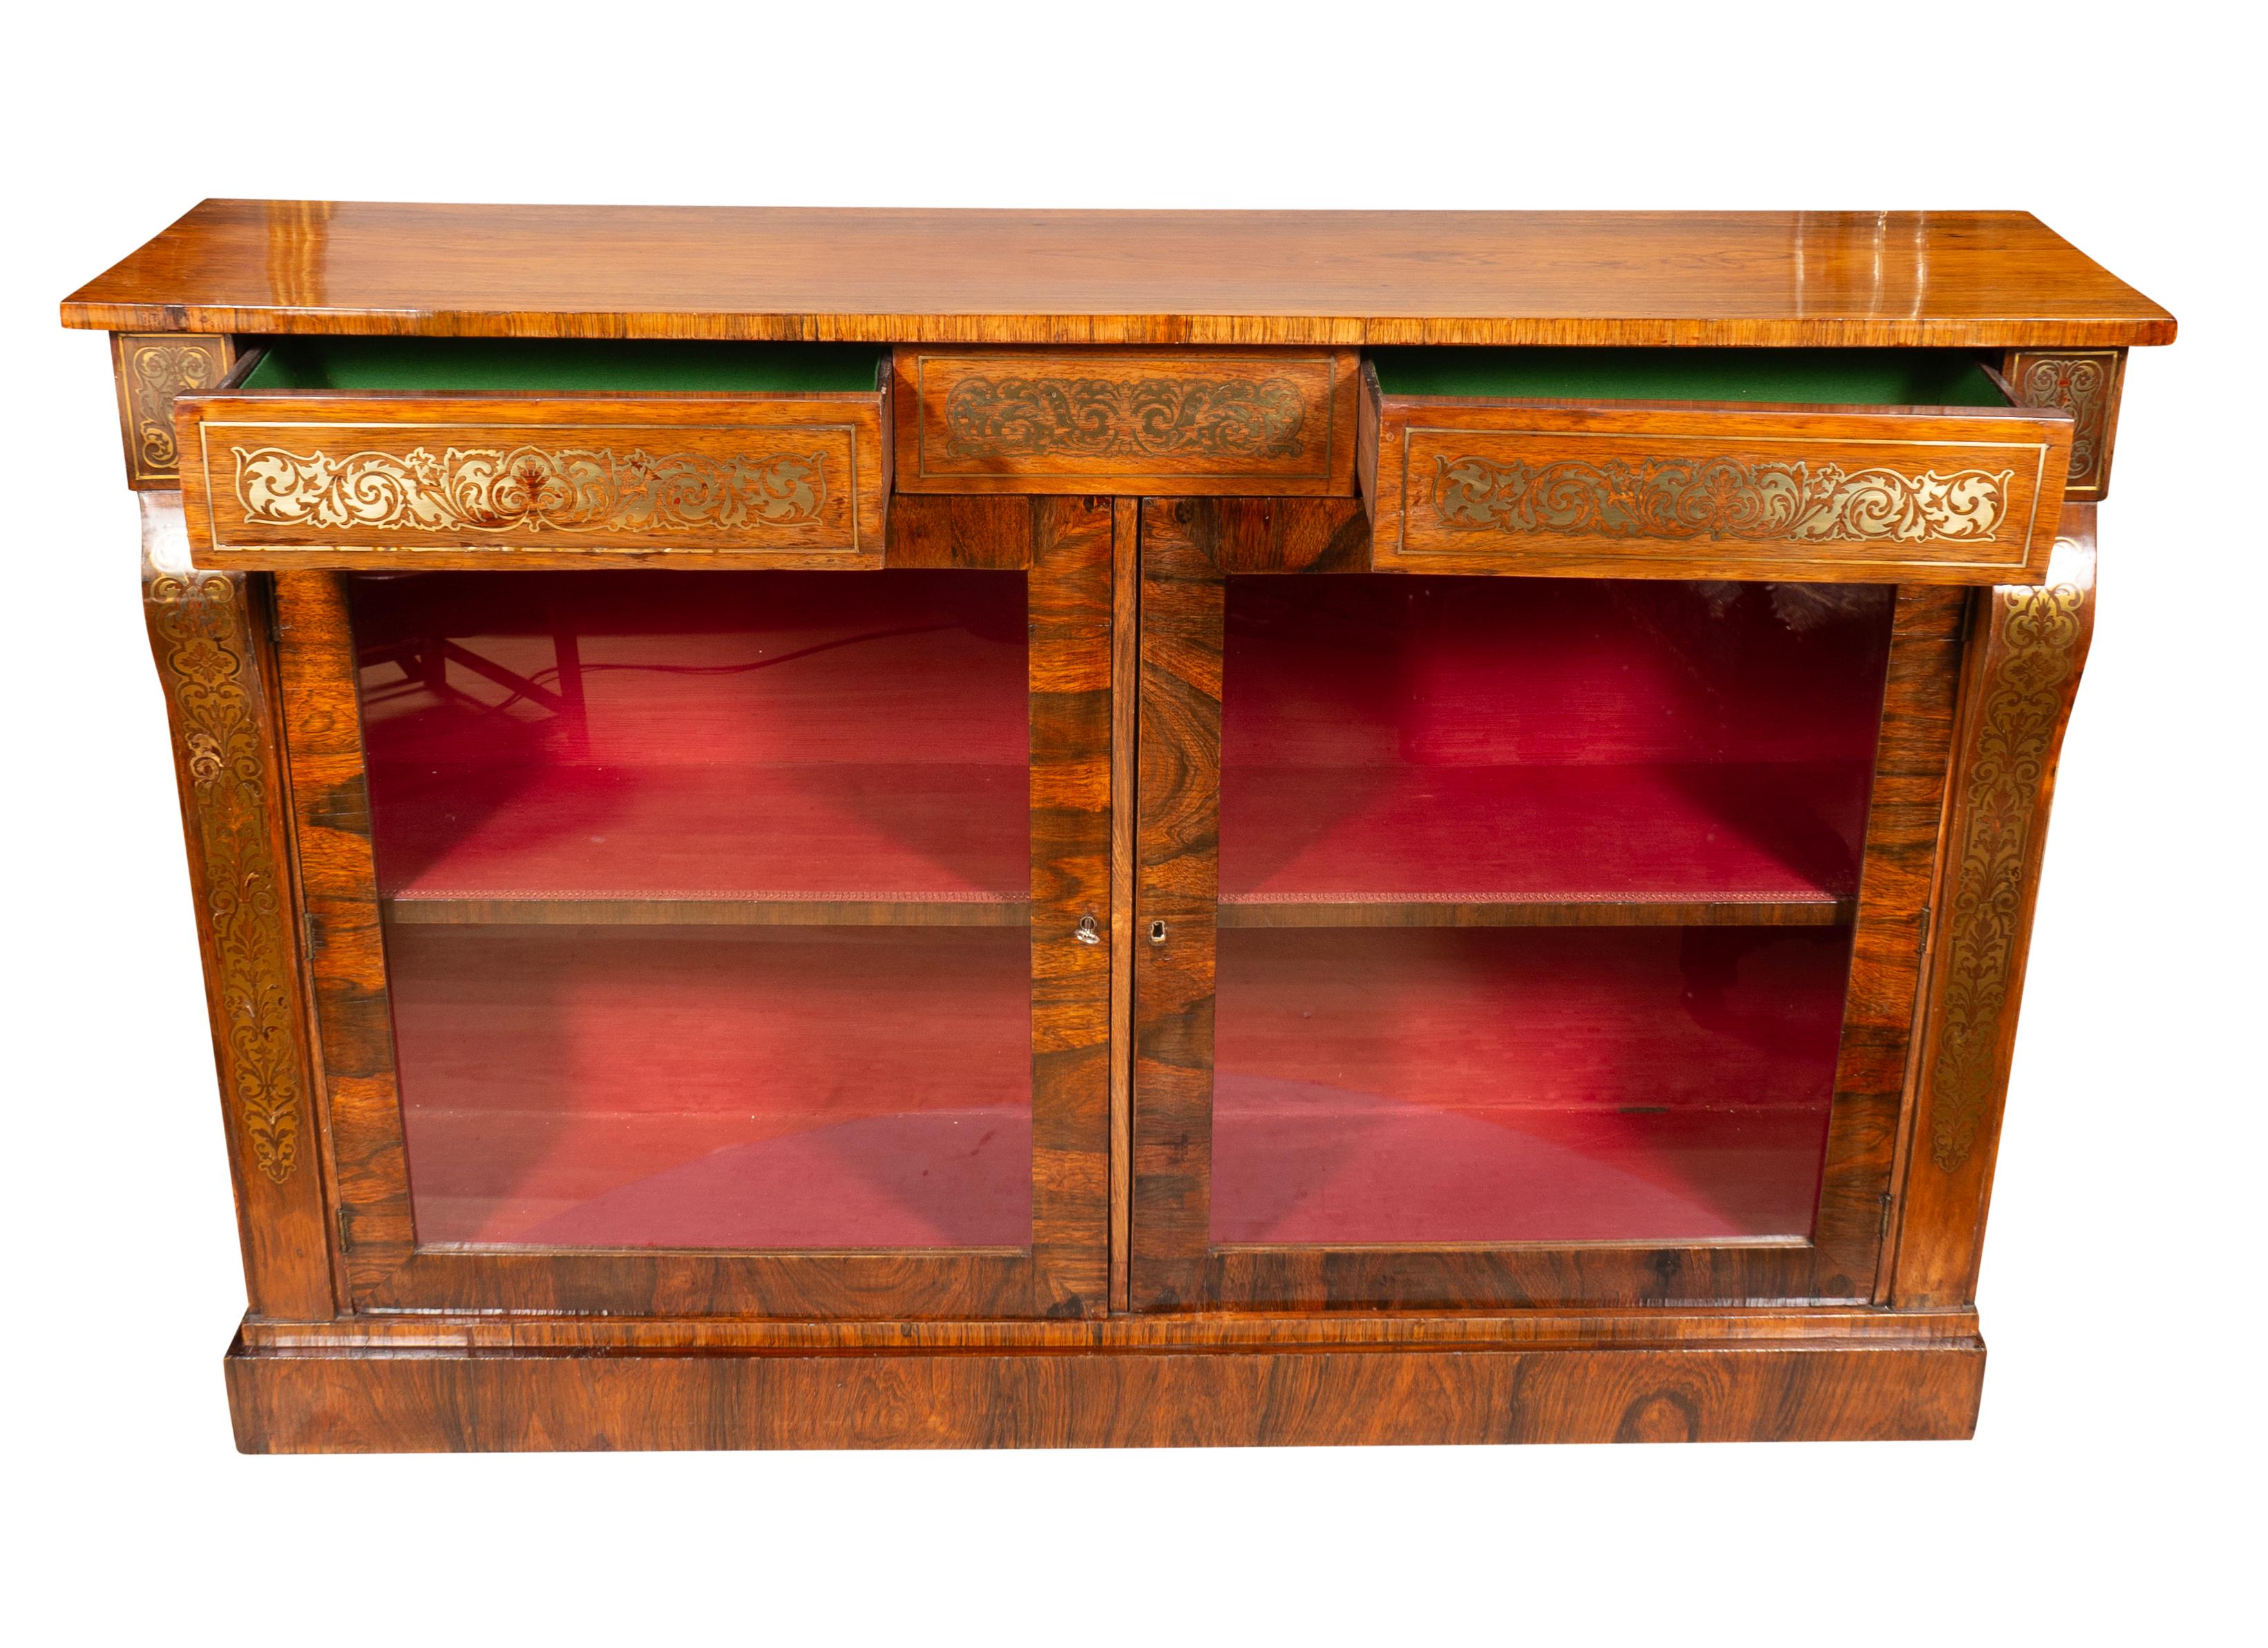 English Regency Rosewood And Brass Inlaid Credenza/Bookcase For Sale